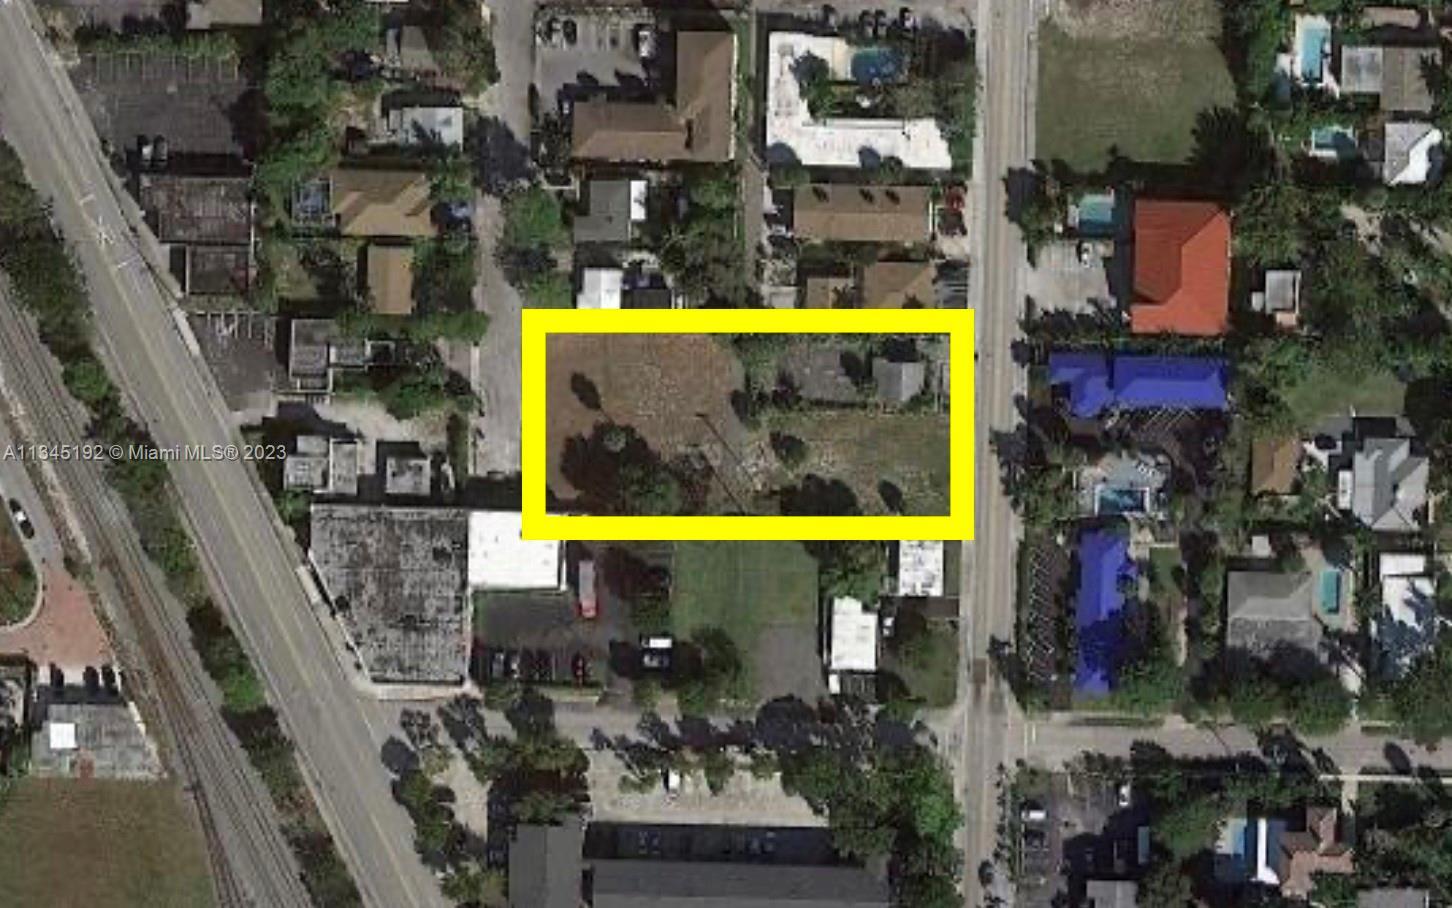 INCREDIBLE Opportunity to purchase 3 connected parcels totaling over 3/4 acre in PRIME Lake Worth Be